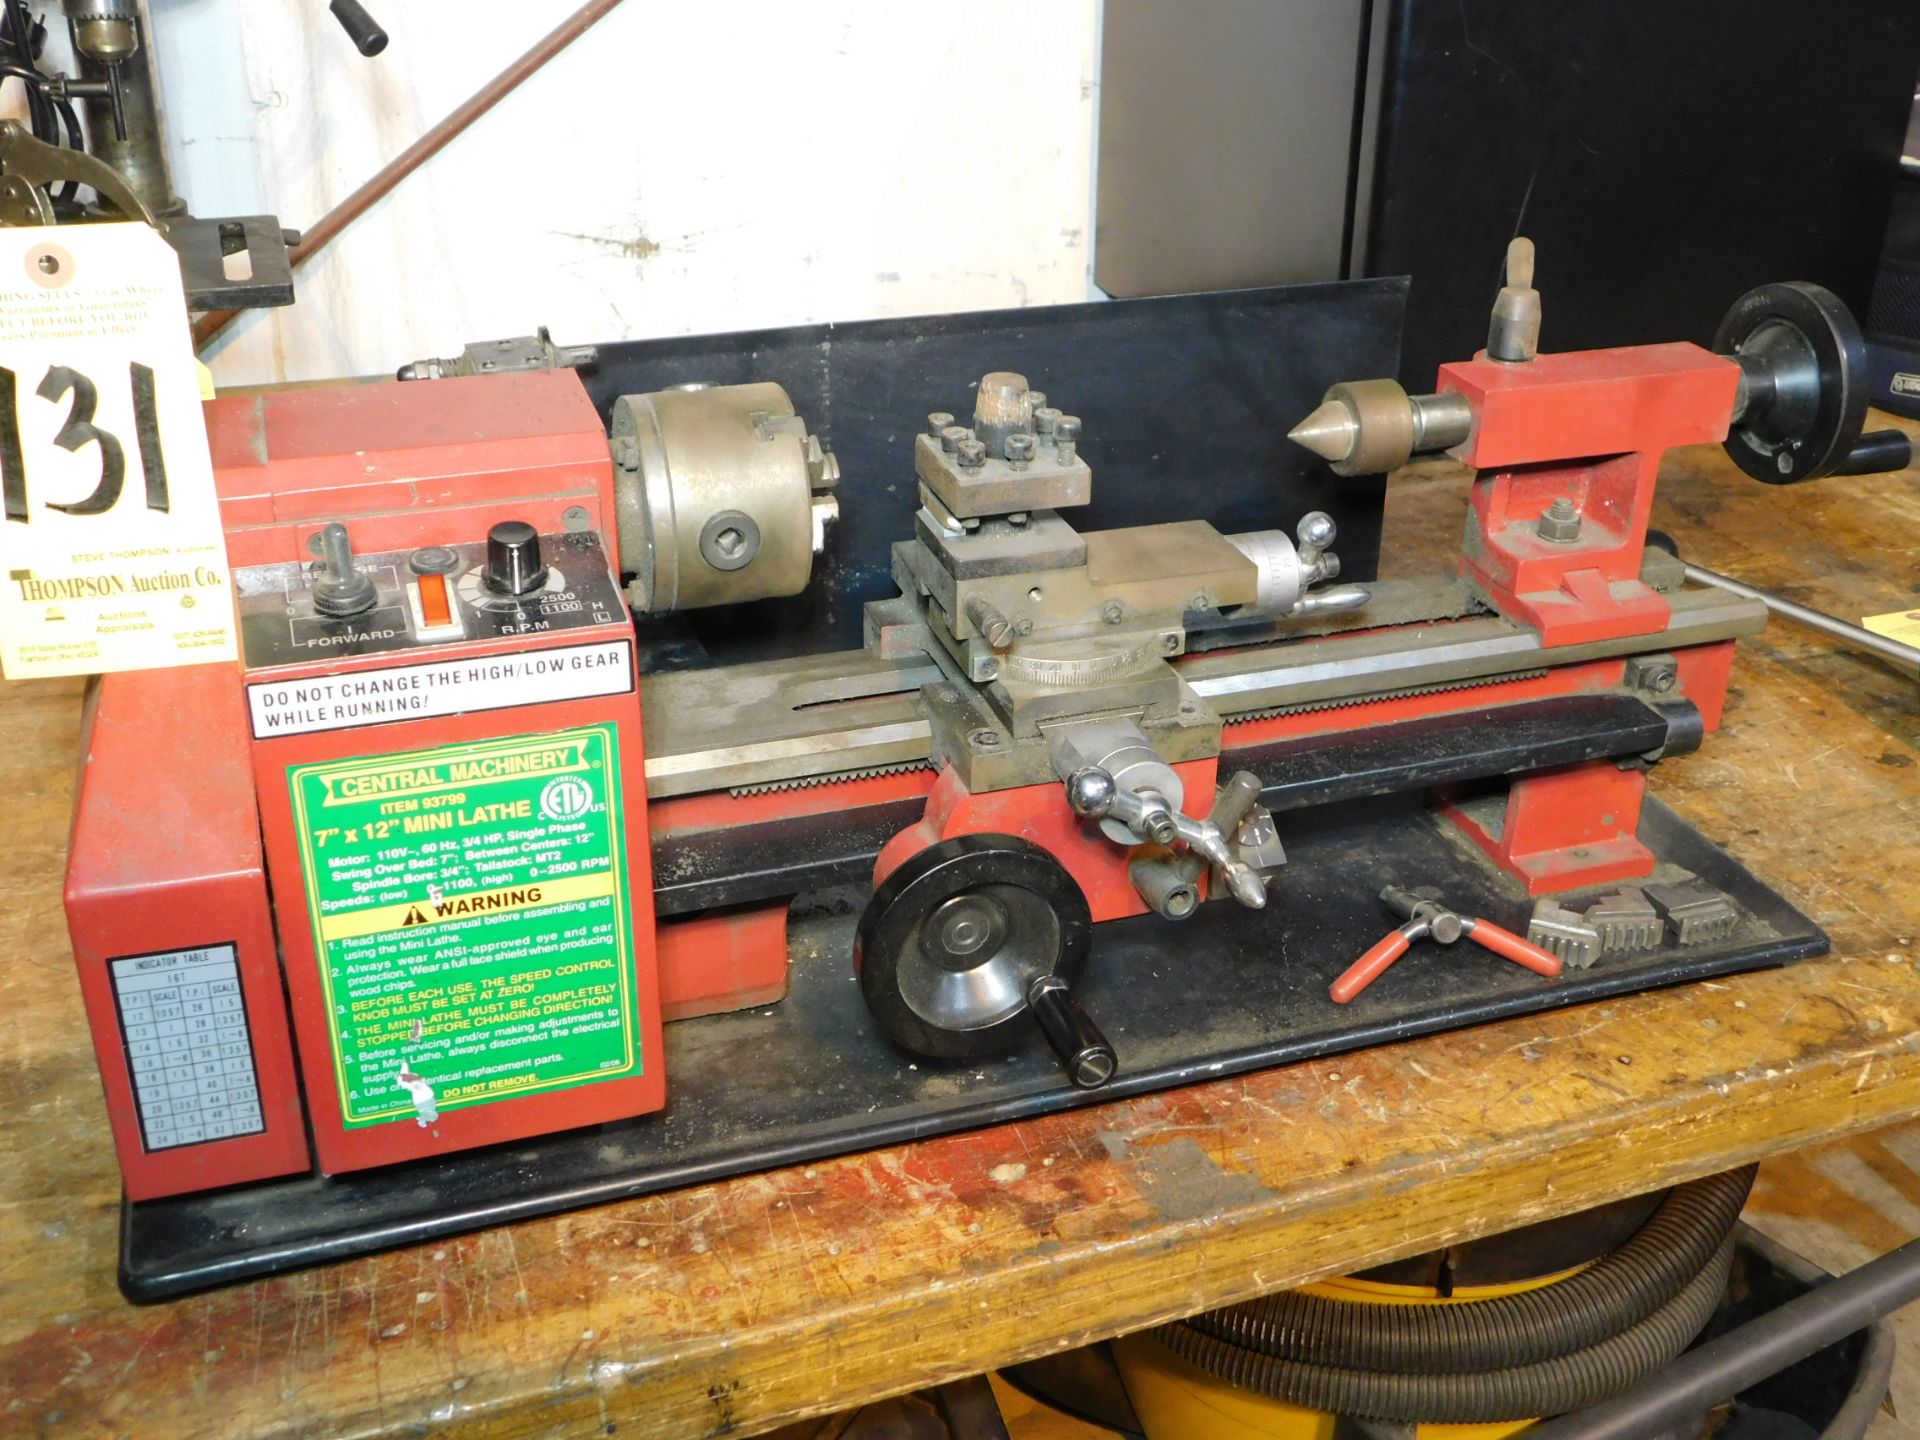 Central Machinery 7" x 12" Bench Model Lathe, 115V, 1 phase, Lot Location 3204 Olympia Dr. A,